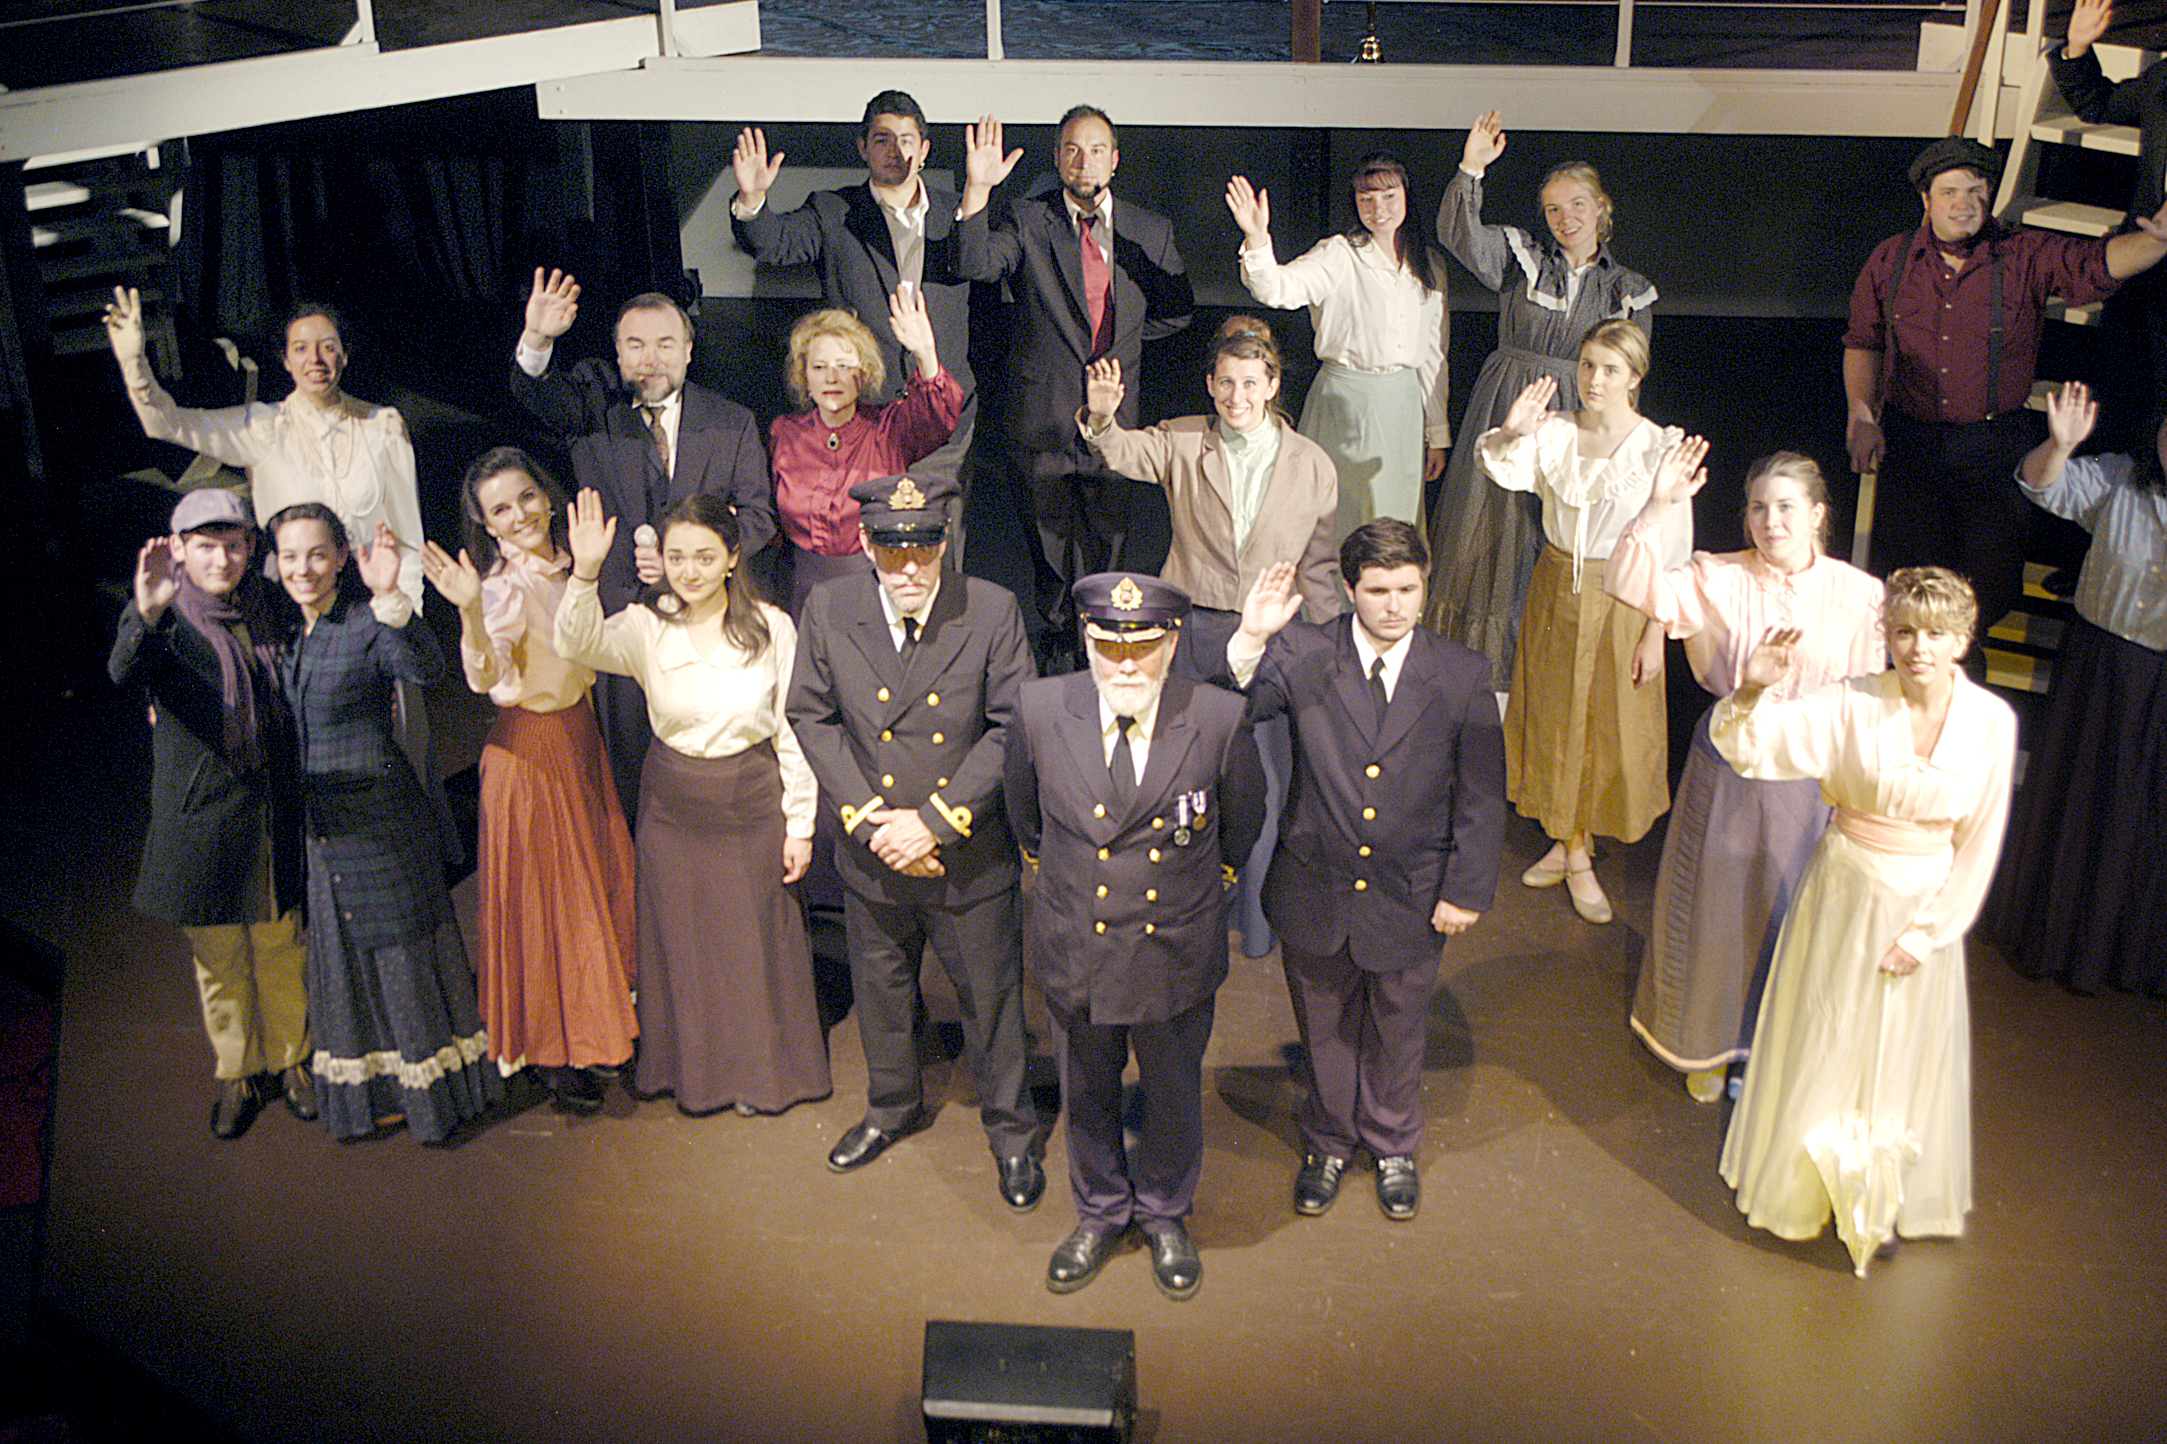 “Titanic: The Musical” opens at 7:30 this evening at the Port Angeles Community Playhouse